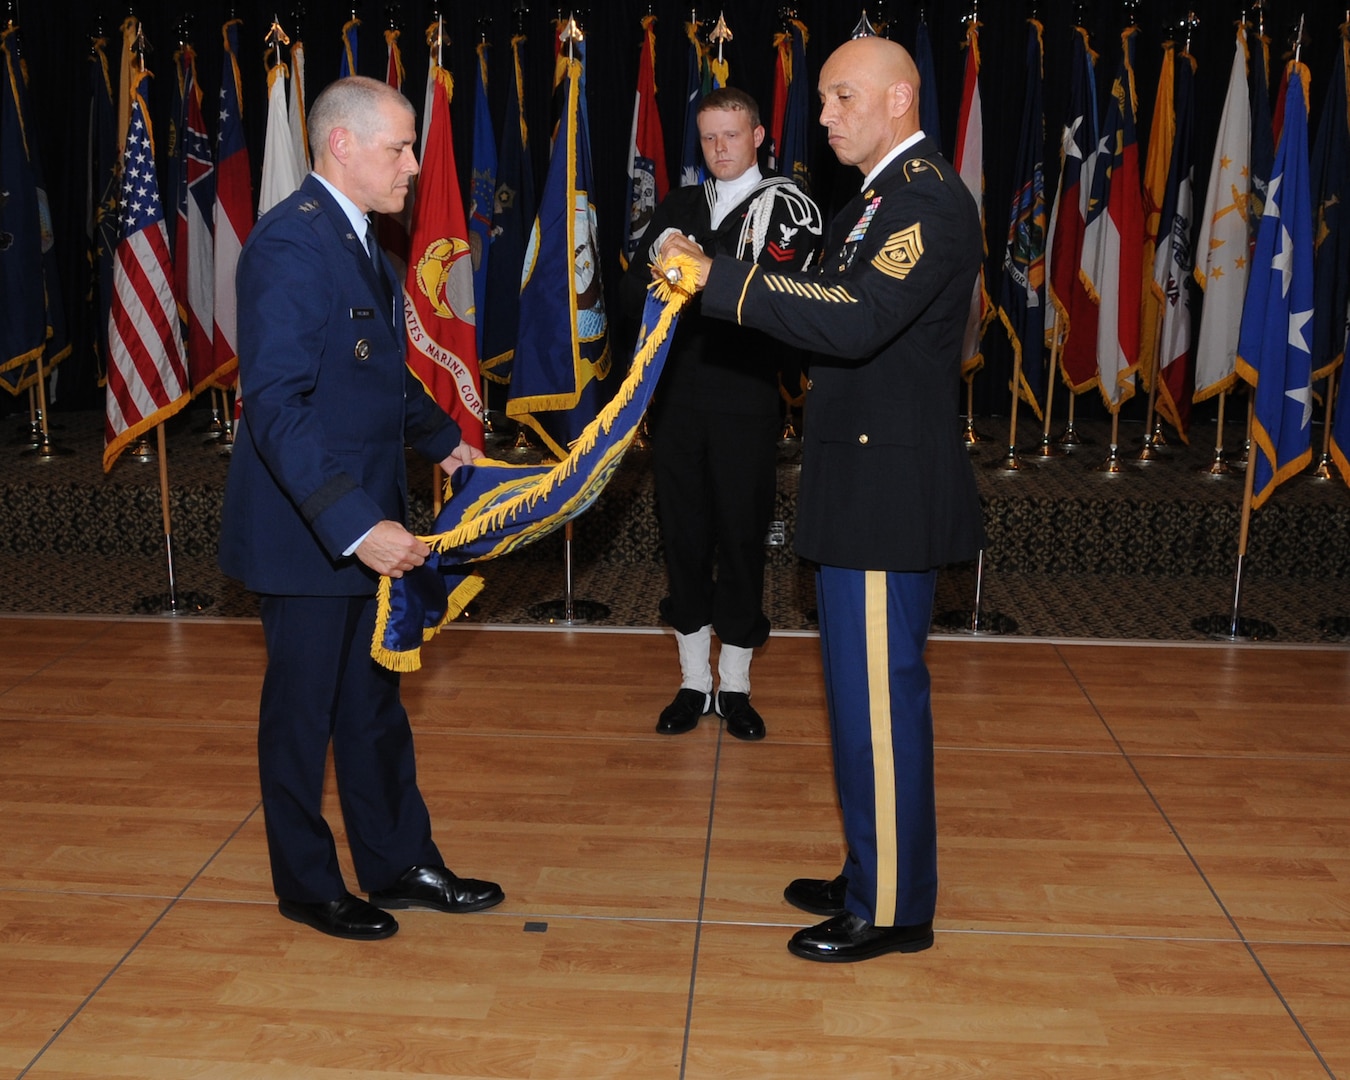 U.S. Air Force Maj. Gen. Thomas A. Bussiere, outgoing commander of Joint Functional Component Command for Global Strike (JFCC GS), and U.S. Army Command Sgt. Maj. Nathaniel Jett, JFCC GS senior enlisted leader, furl and case the JFCC GS flag, marking the command’s inactivation at the Patriot Club on Offutt Air Force Base, Neb., Oct. 2, 2017. U.S. Strategic Command inactivated JFCC GS as part of the command’s restructure of its components to build a coherent and streamlined warfighting structure. The restructure will enhance integration throughout the deterrence enterprise and match the organizational structure of other warfighting commands.